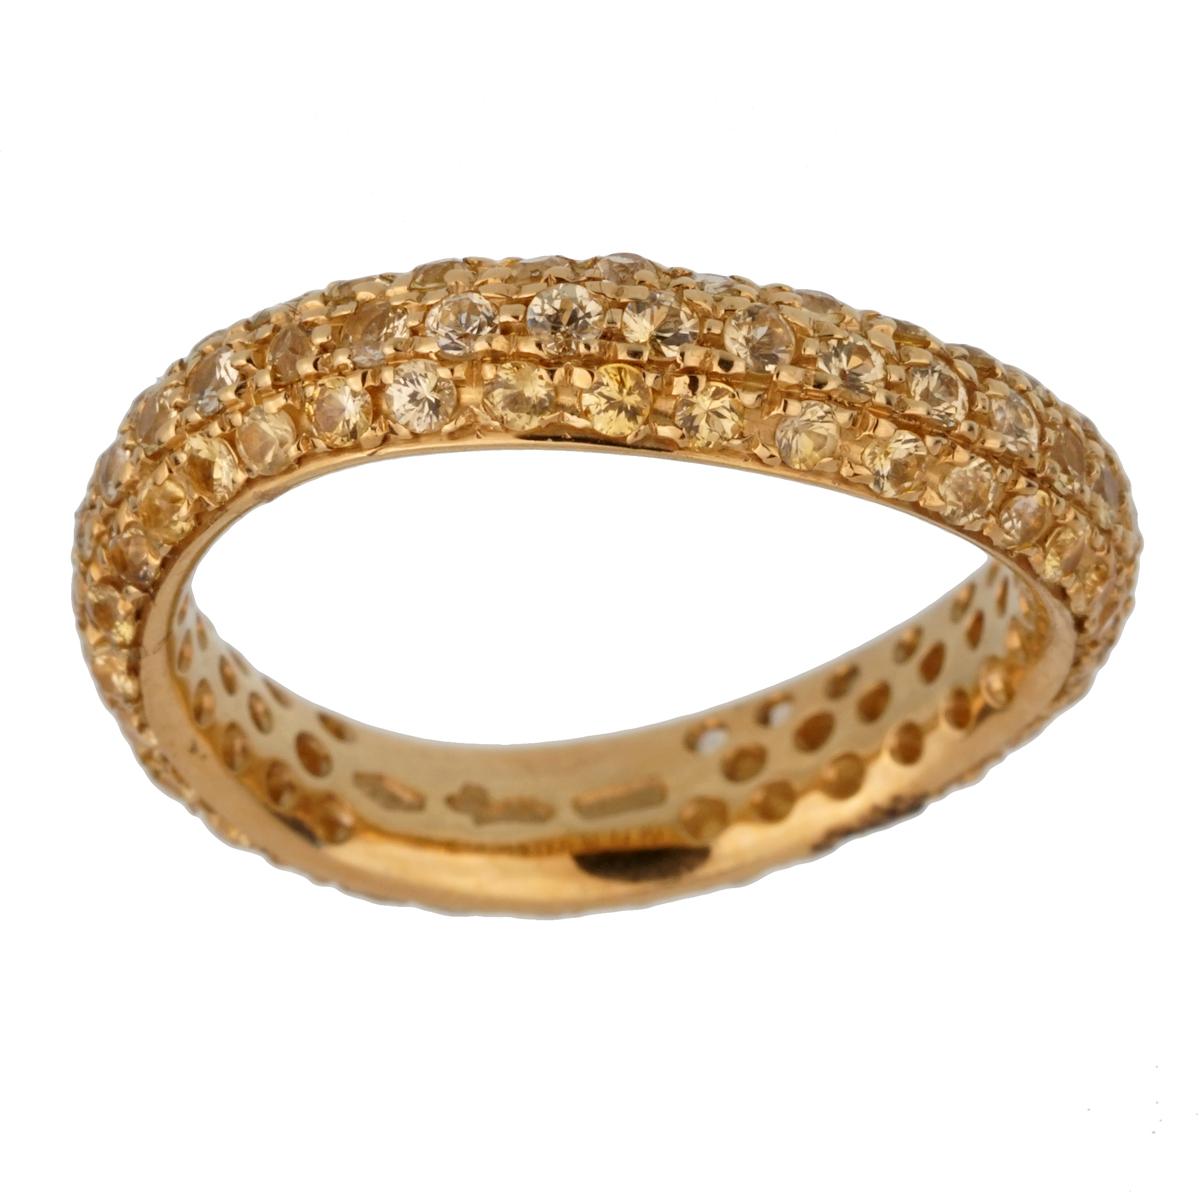 A fabulous brand new Pomellato yellow gold wave style band ring adorned with 2 rows of yellow sapphires. The ring measures a size 6 3/4

Sku: 2455